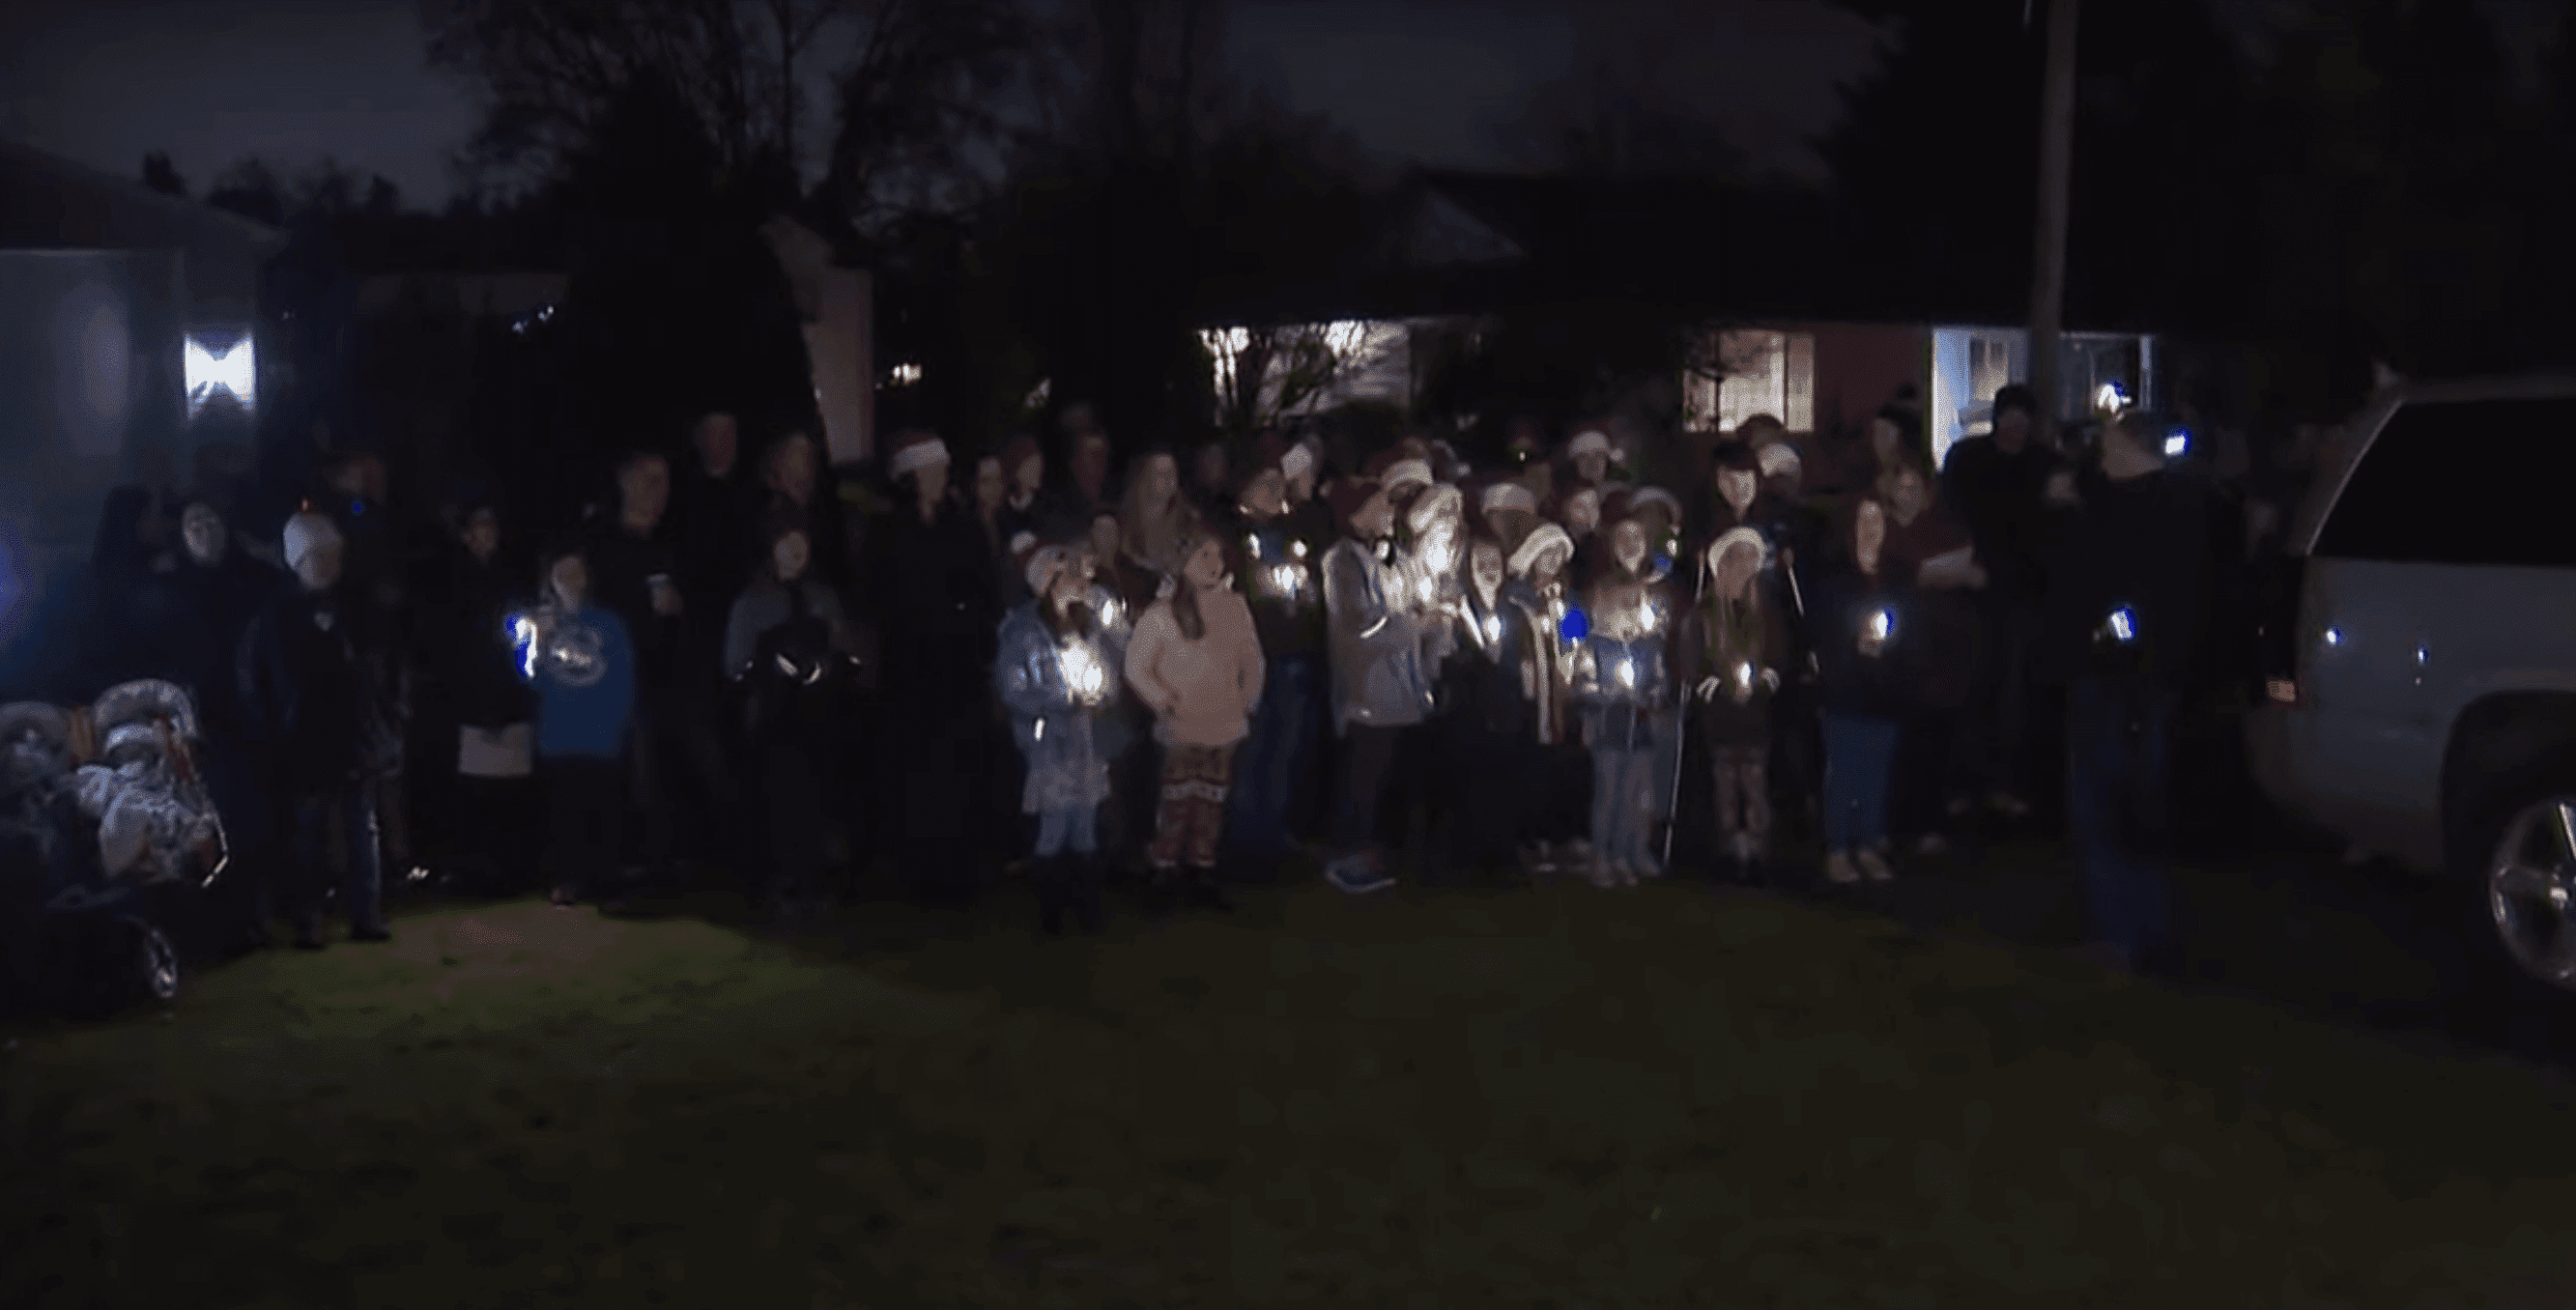 Students from York Elementary school caroling in Laurie Burpee's front yard in Vancouver, Washington | Source: YouTube/KGWNews